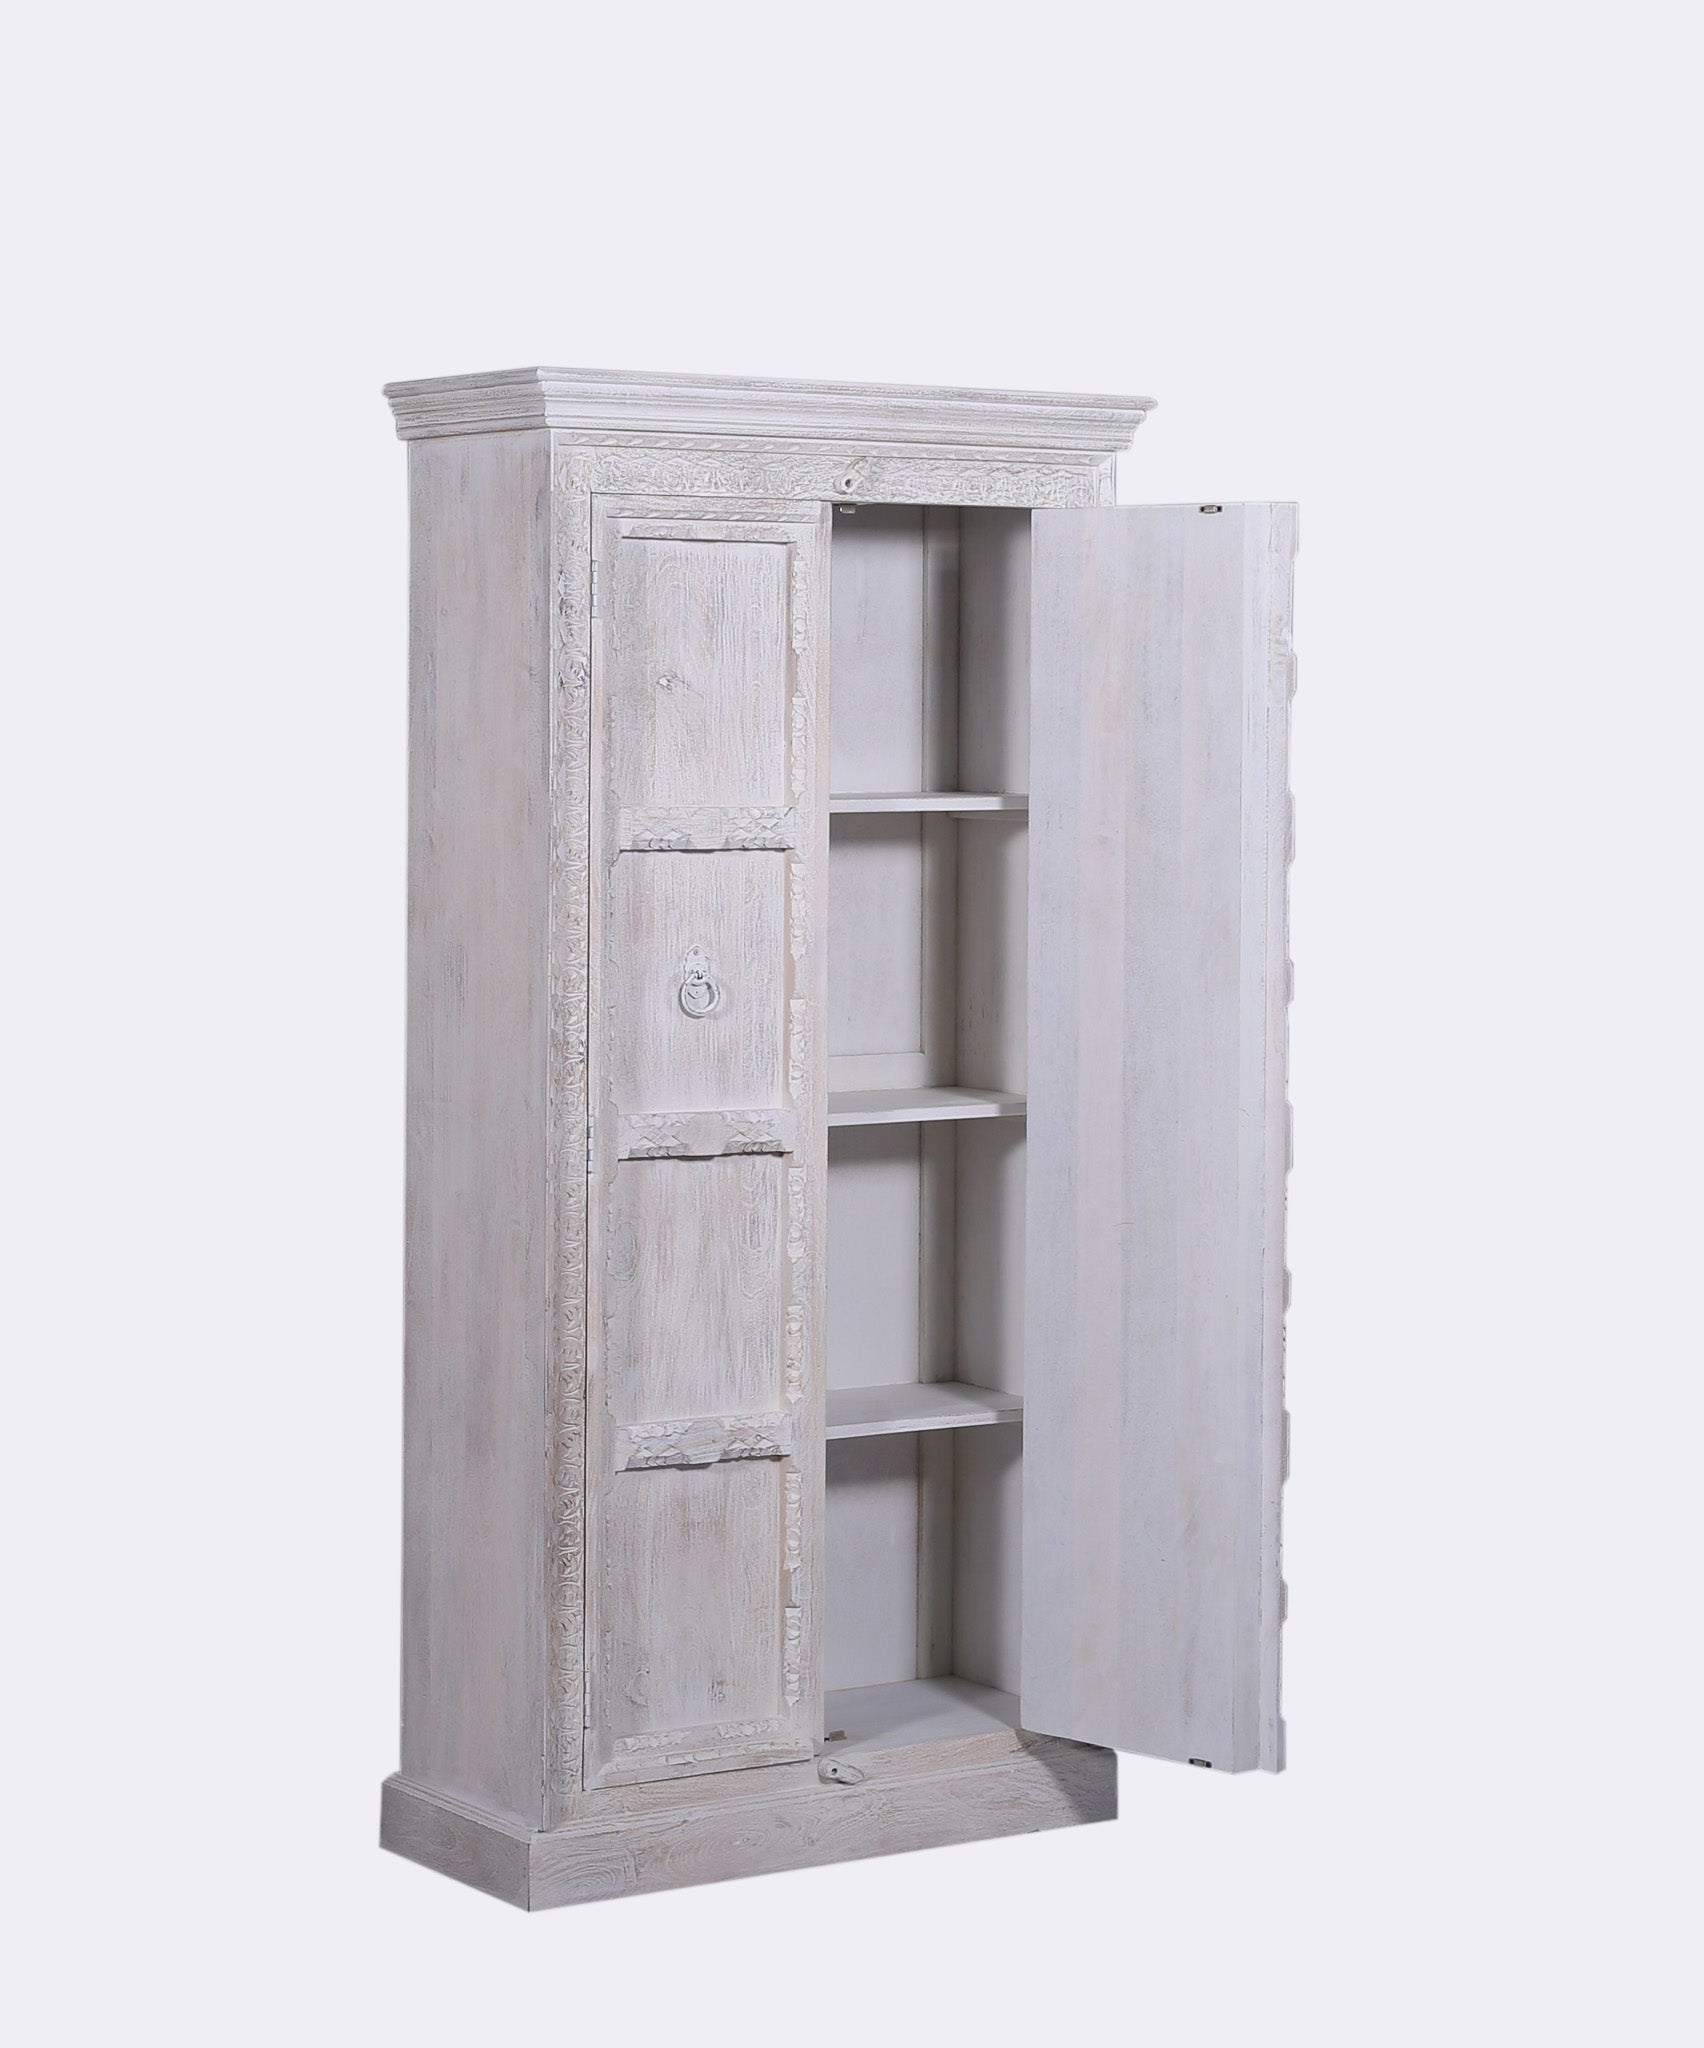 Mahala Nomad Wooden Cabinet in Distressed White Finish in Cabinets by VMInnovations